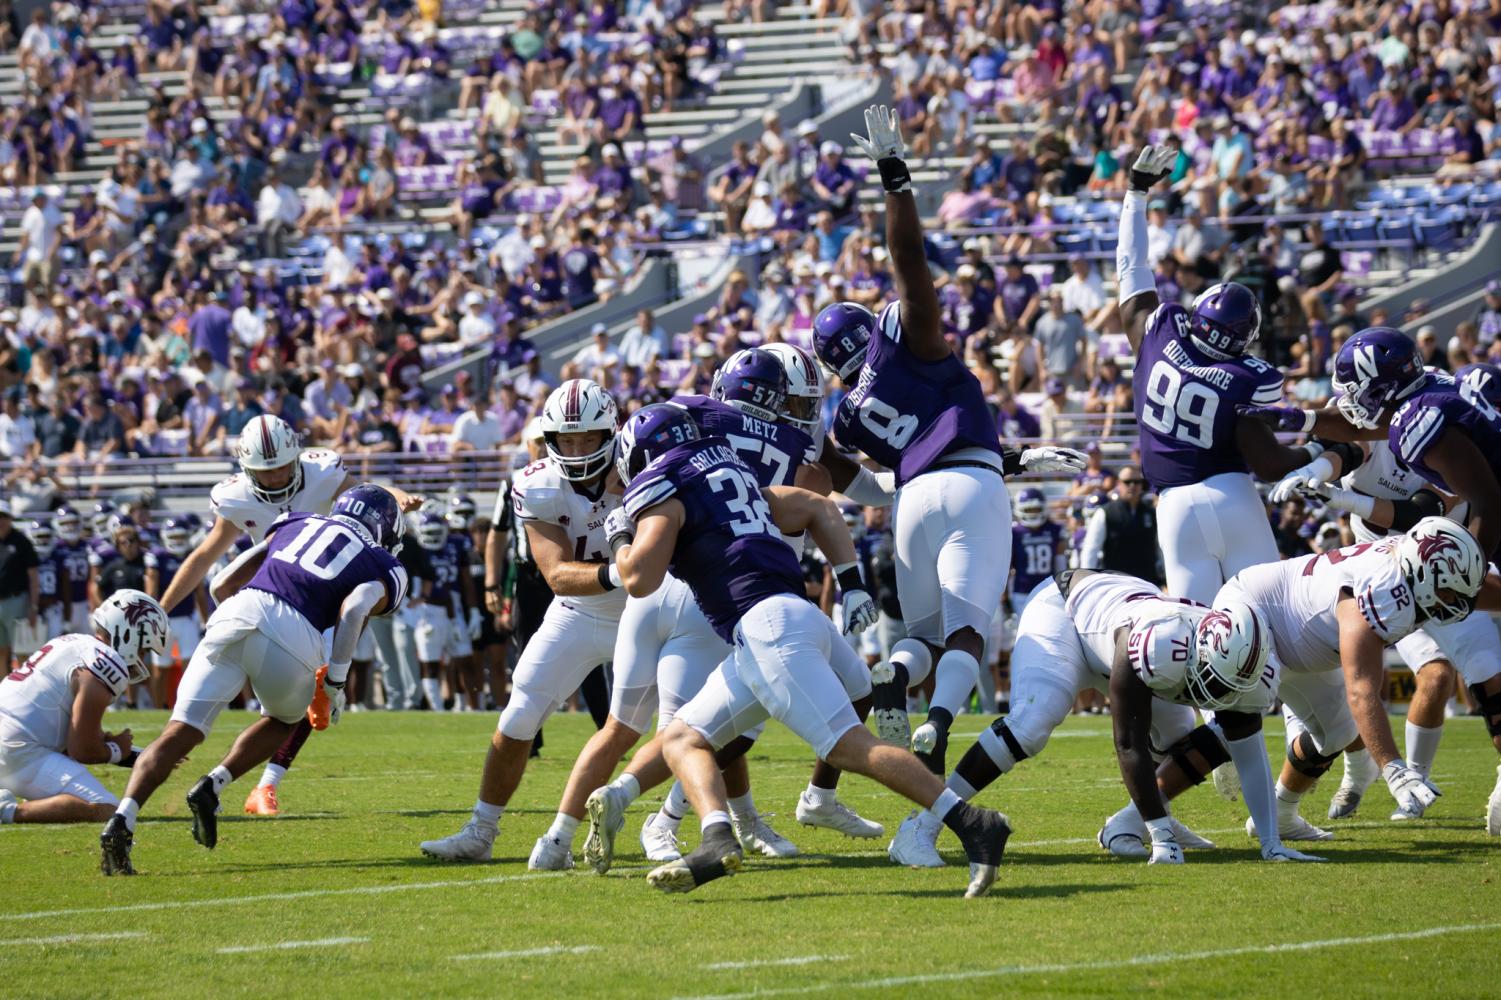 Football players in purple jerseys jump to try to block a field goal. 